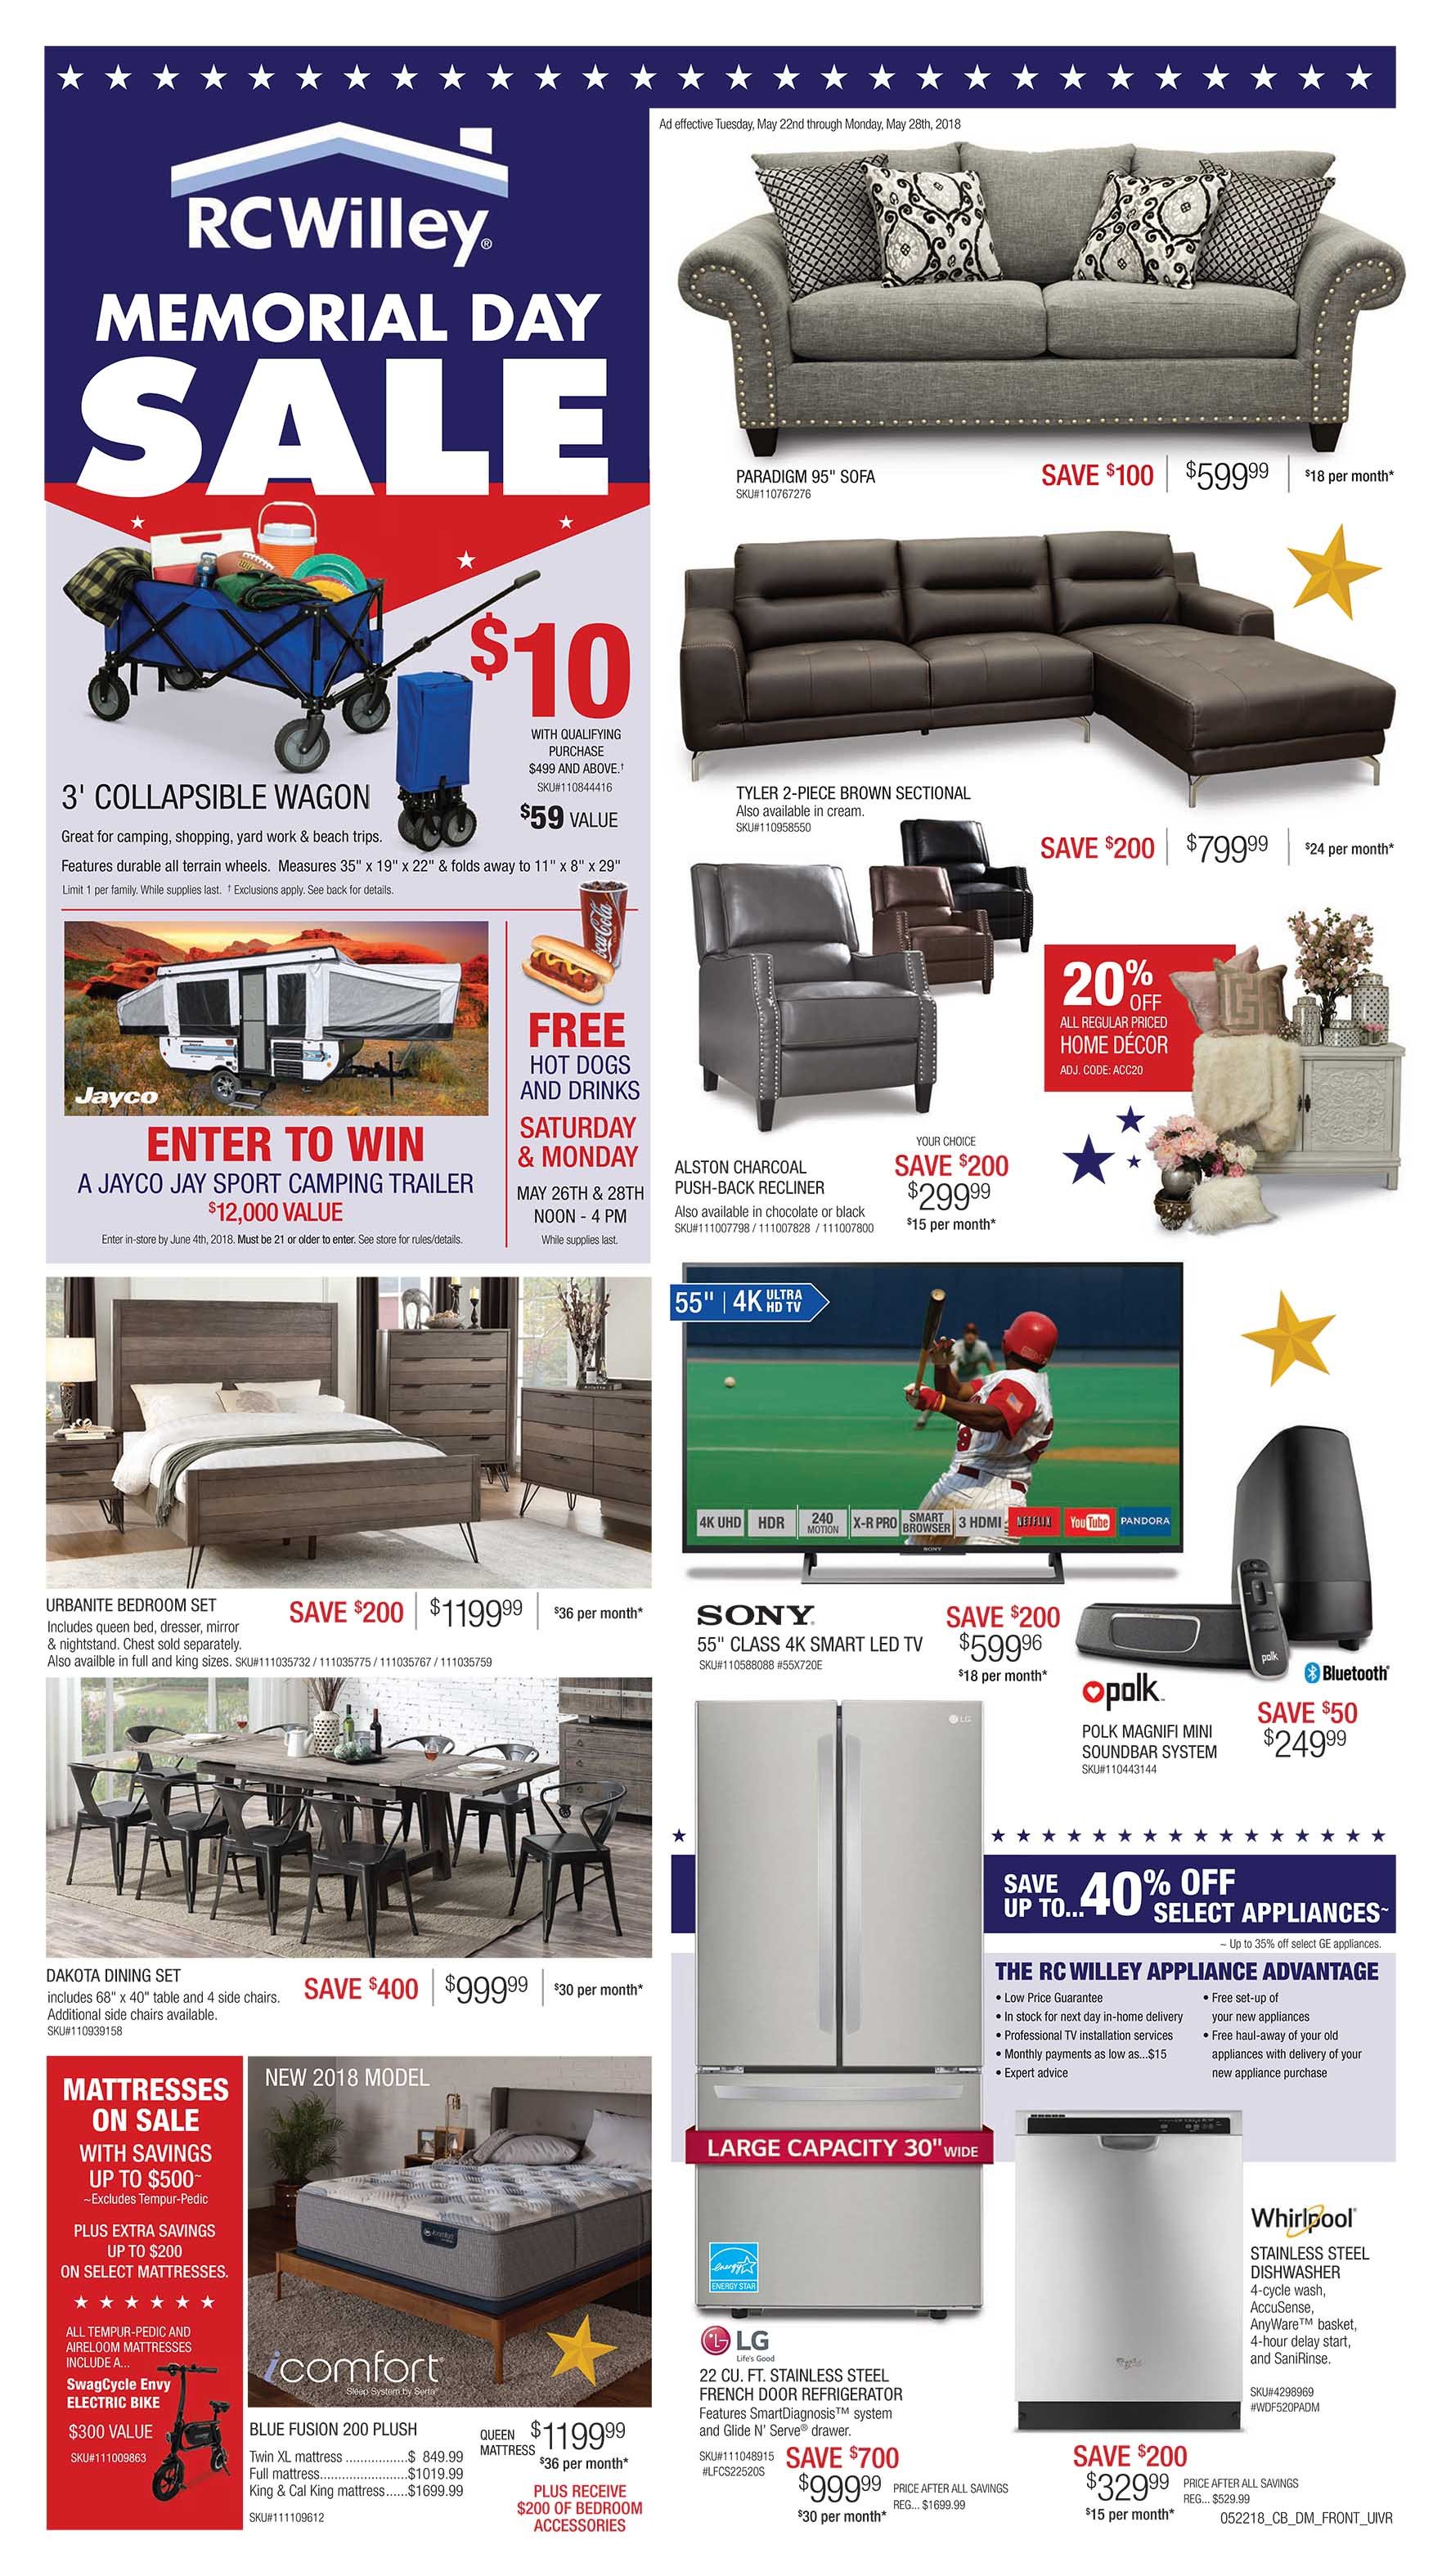 Memorial Day Sale! RC Willey Furniture Store